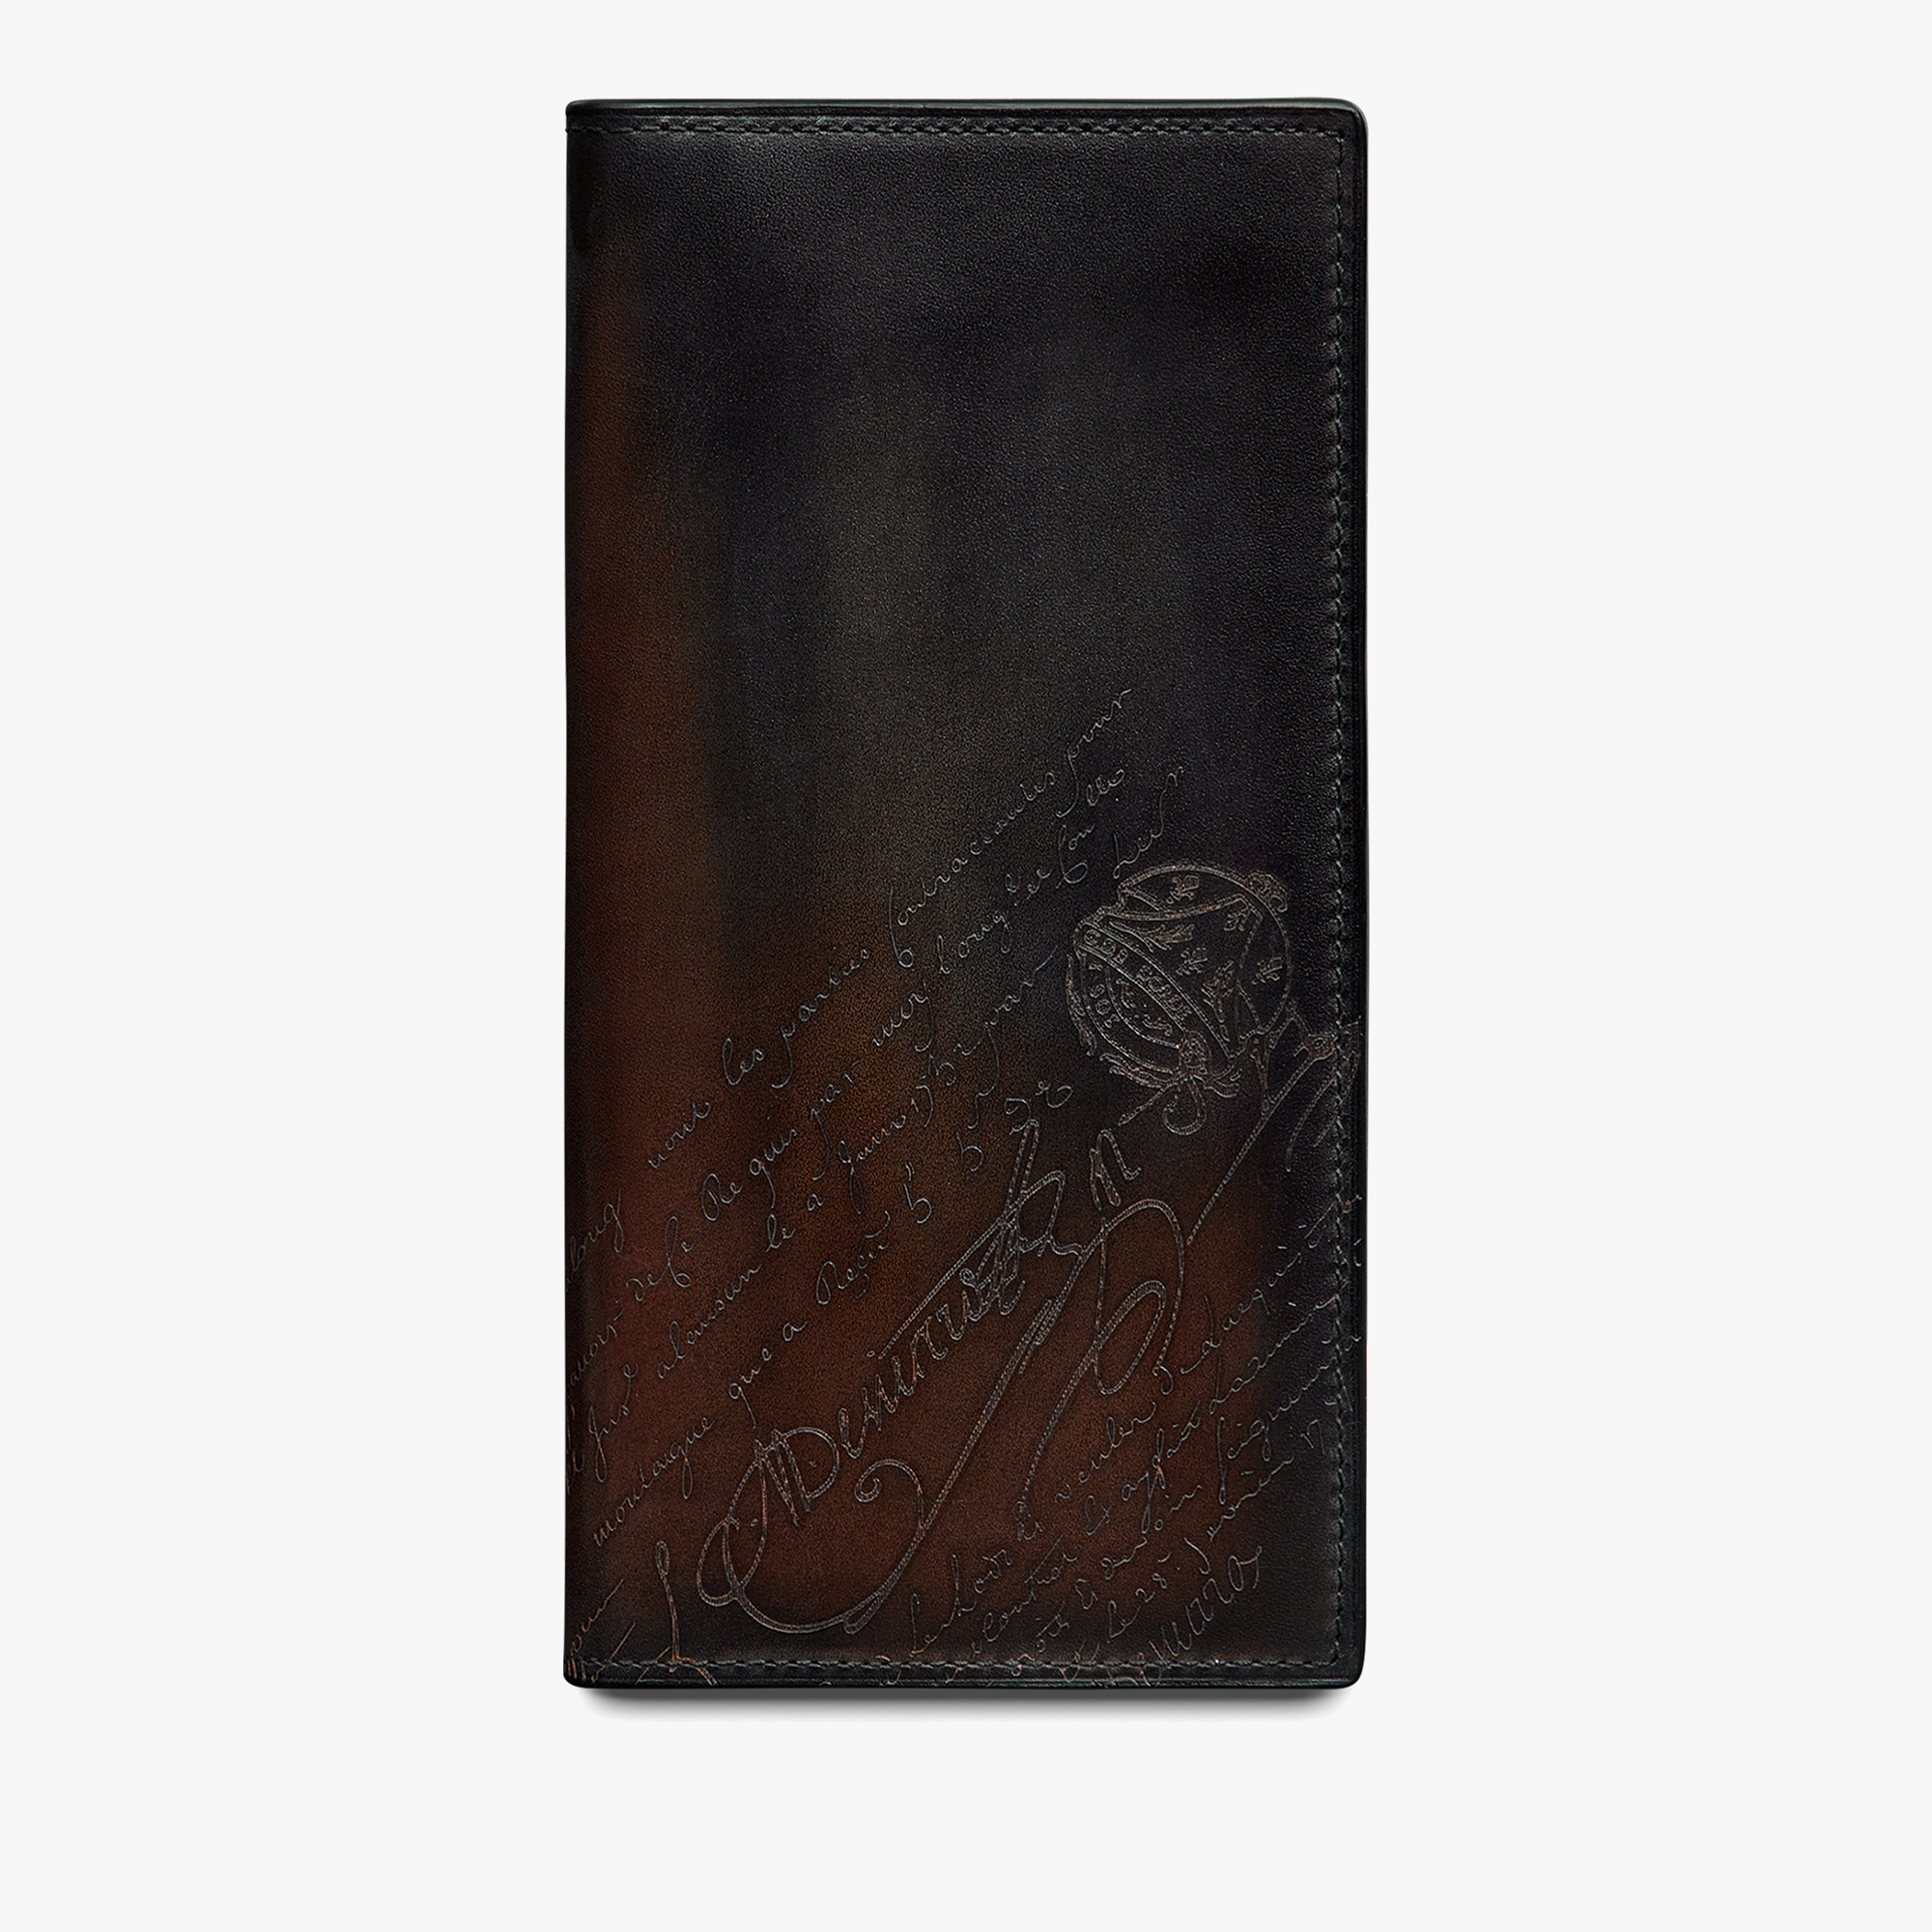 Santal Scritto Leather Long Wallet, CHARCOAL BROWN, hi-res